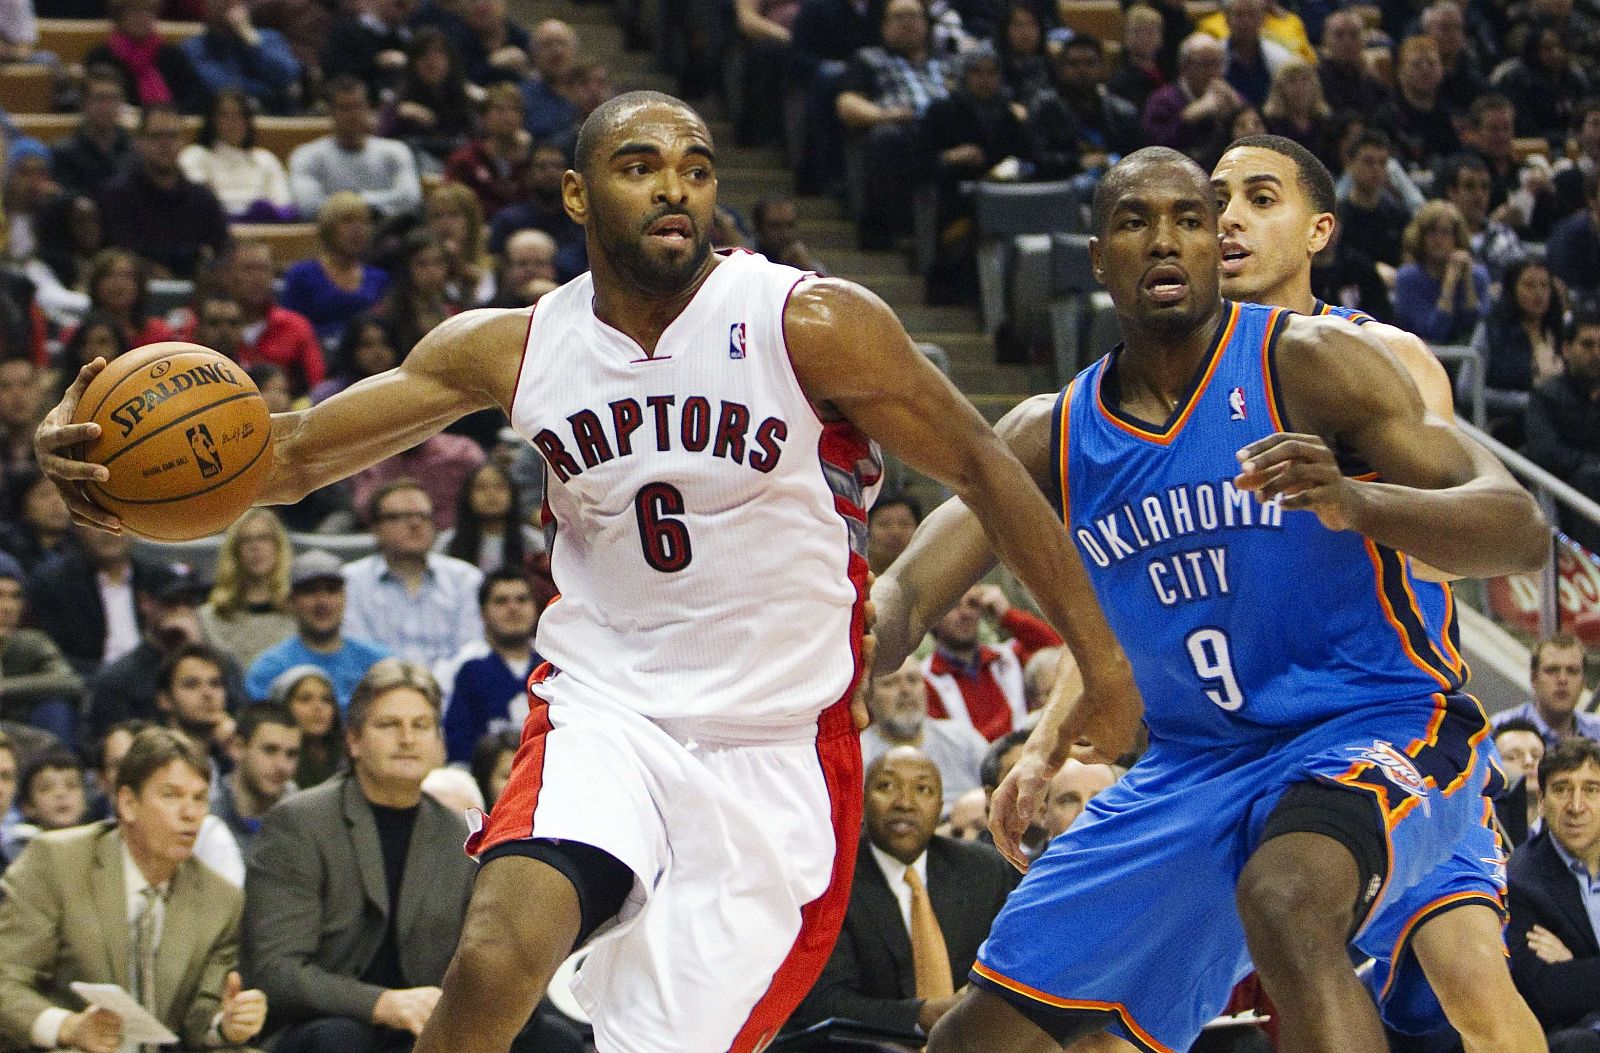 Raptors' Anderson drives to the basket past Thunder's Ibaka in the first half of their NBA basketball game in Toronto